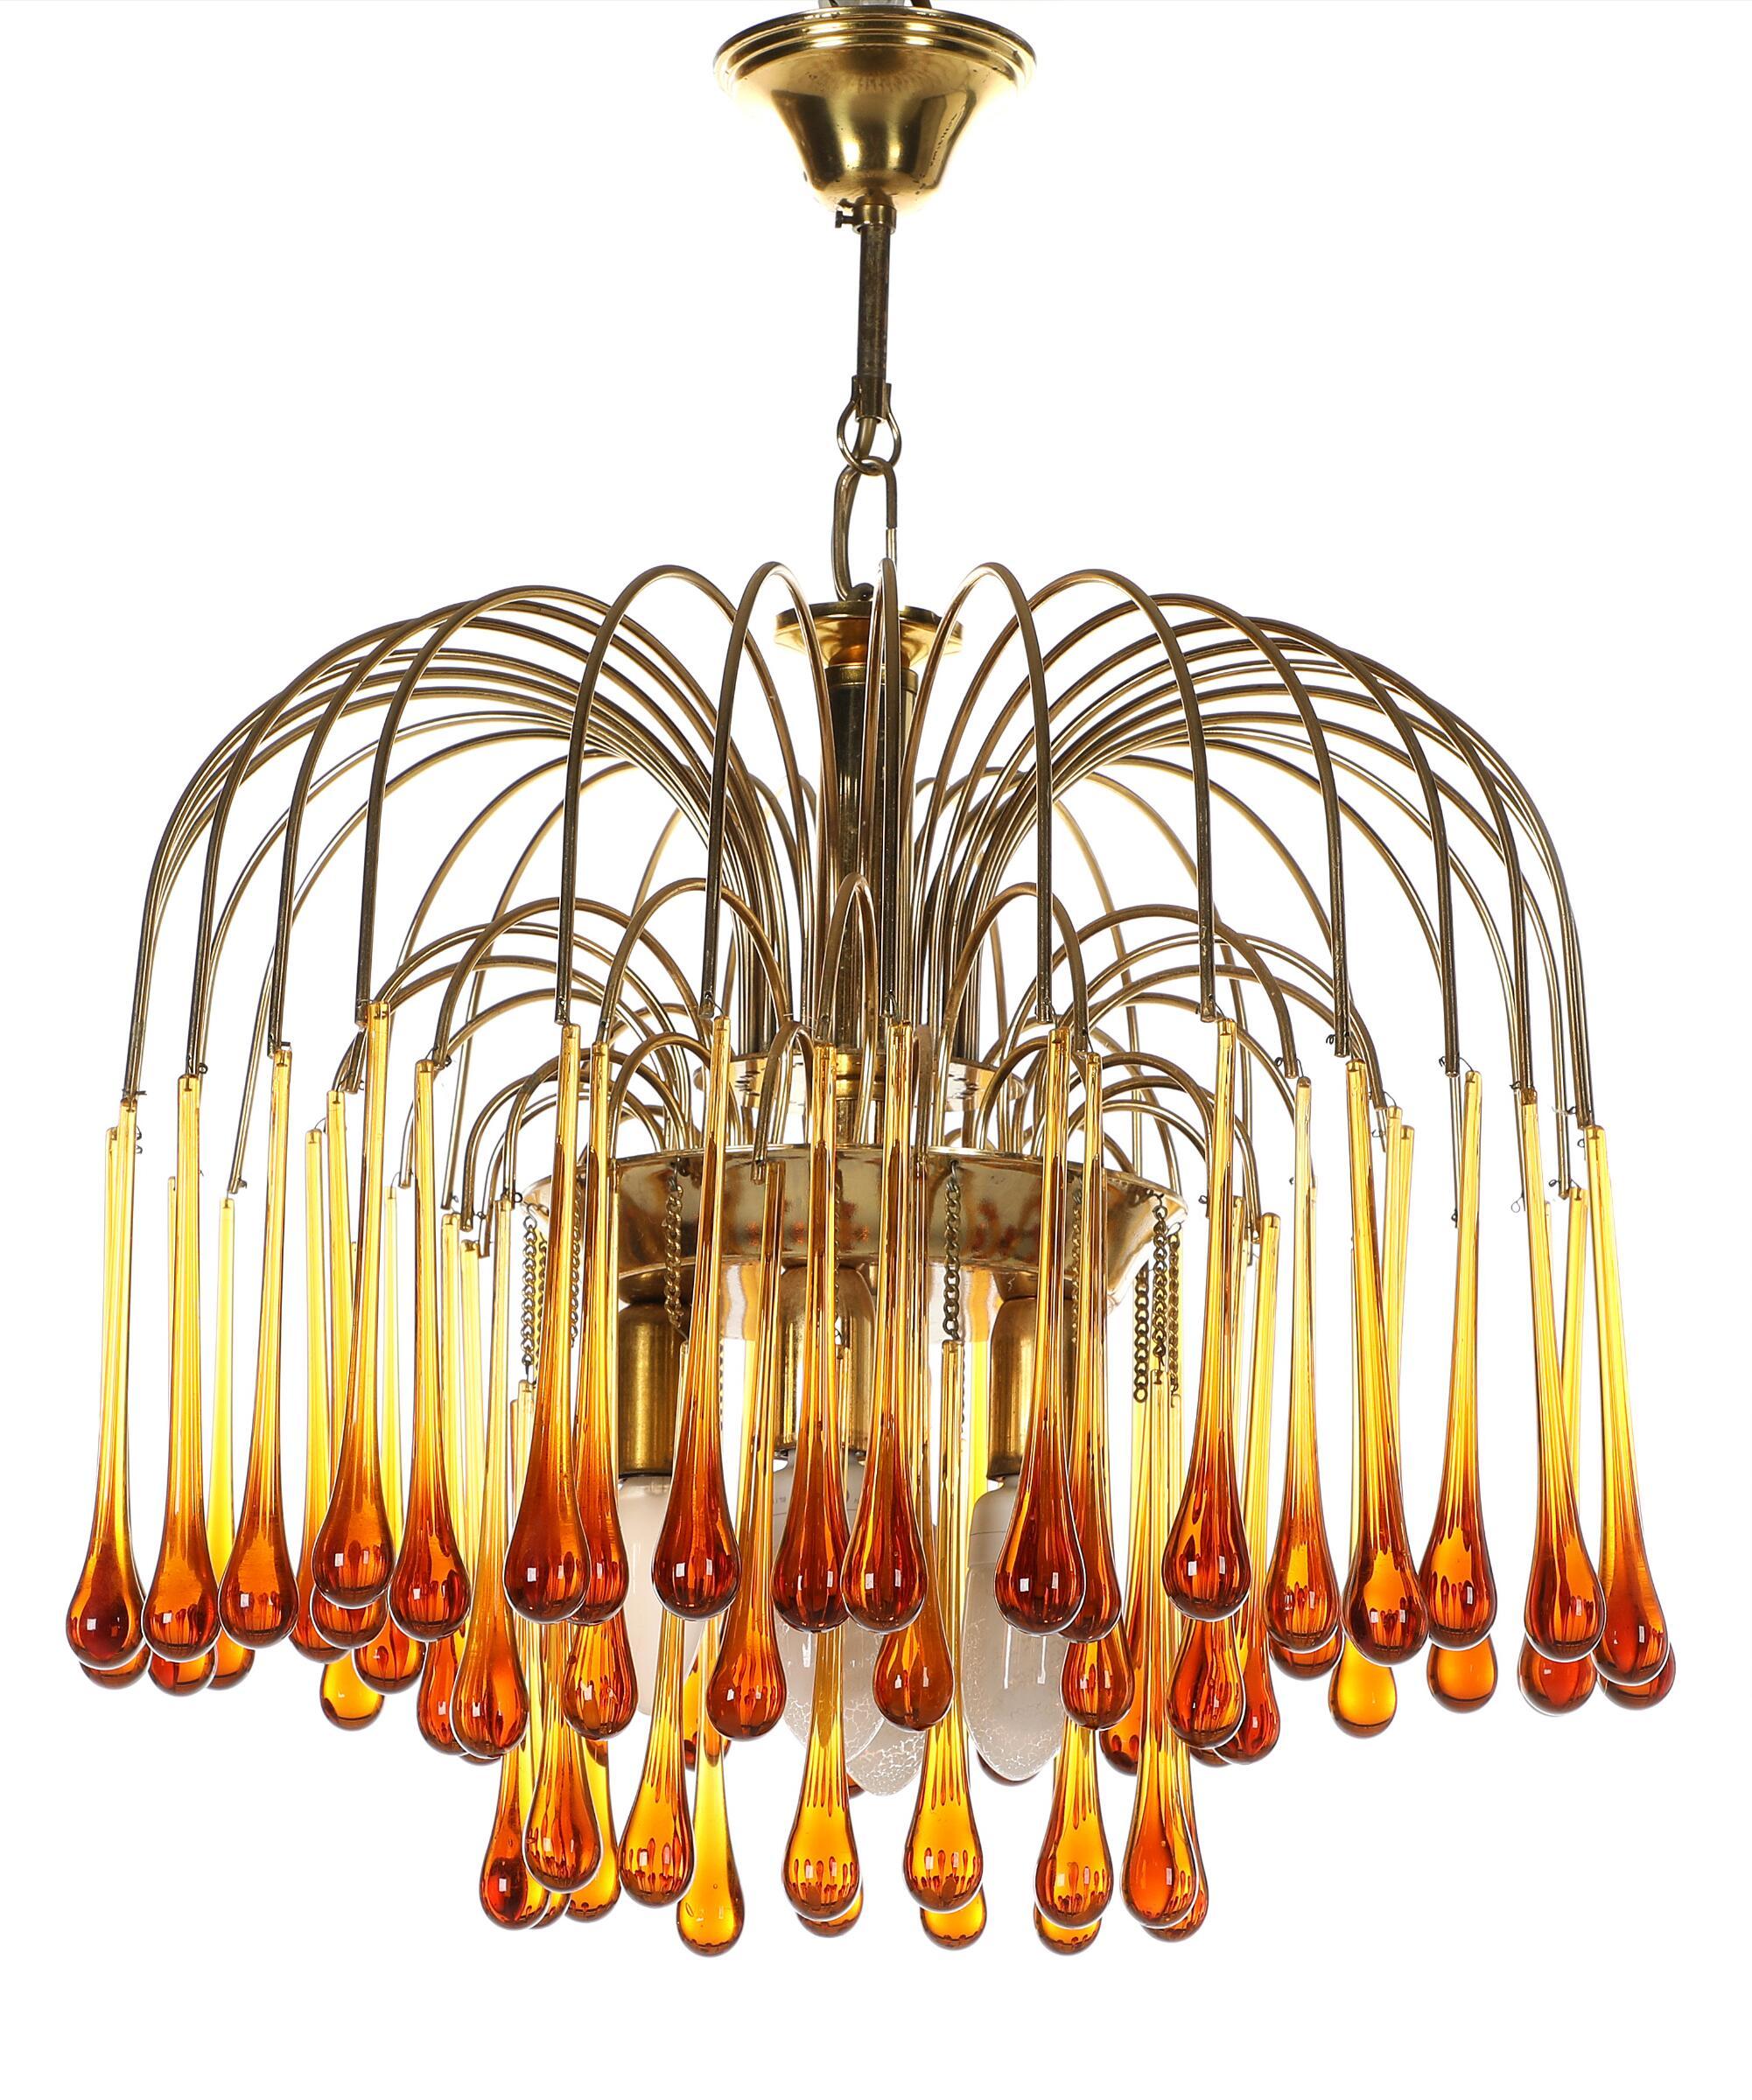 Brass Chandelier, Hung with Drop-Shaped Prisms of Amber Glass In Good Condition For Sale In Vejle Øst, DK